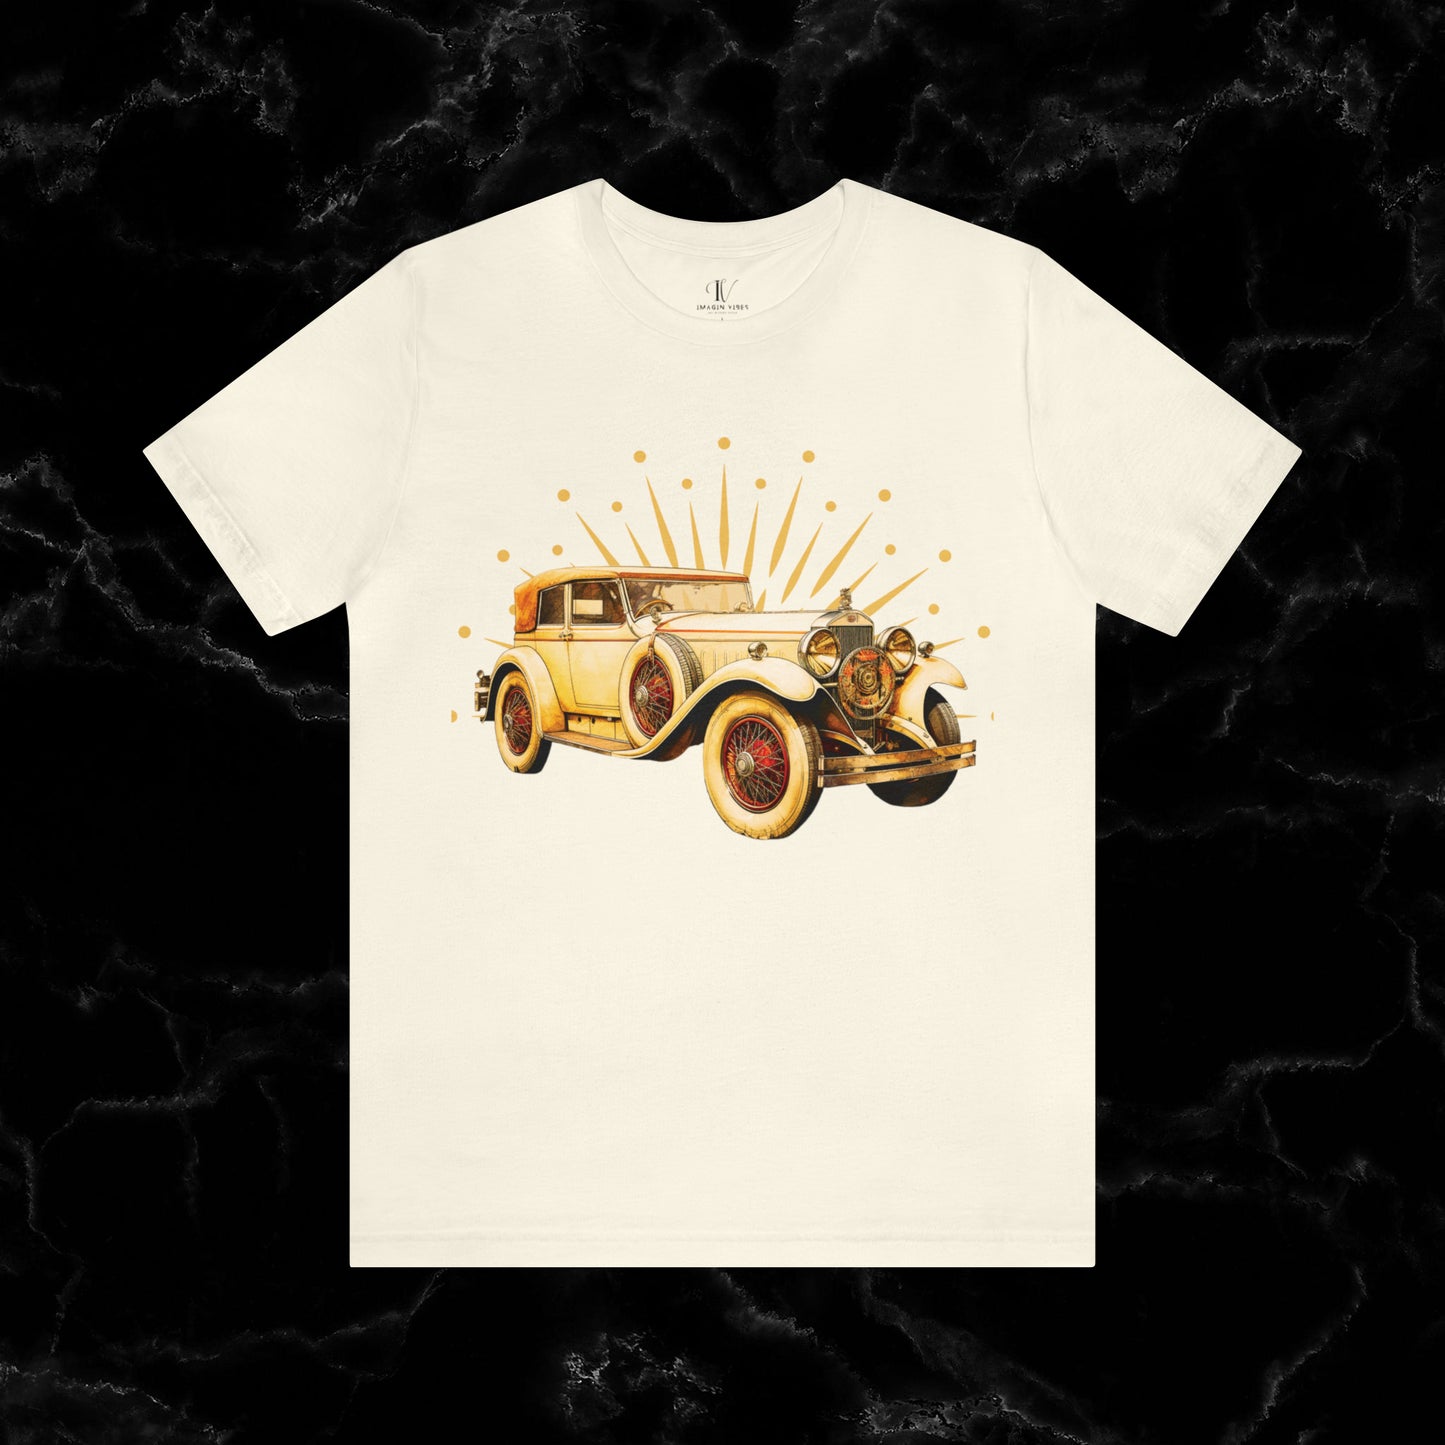 Vintage Car Enthusiast T-Shirt with Classic Wheels and Timeless Appeal T-Shirt Natural S 